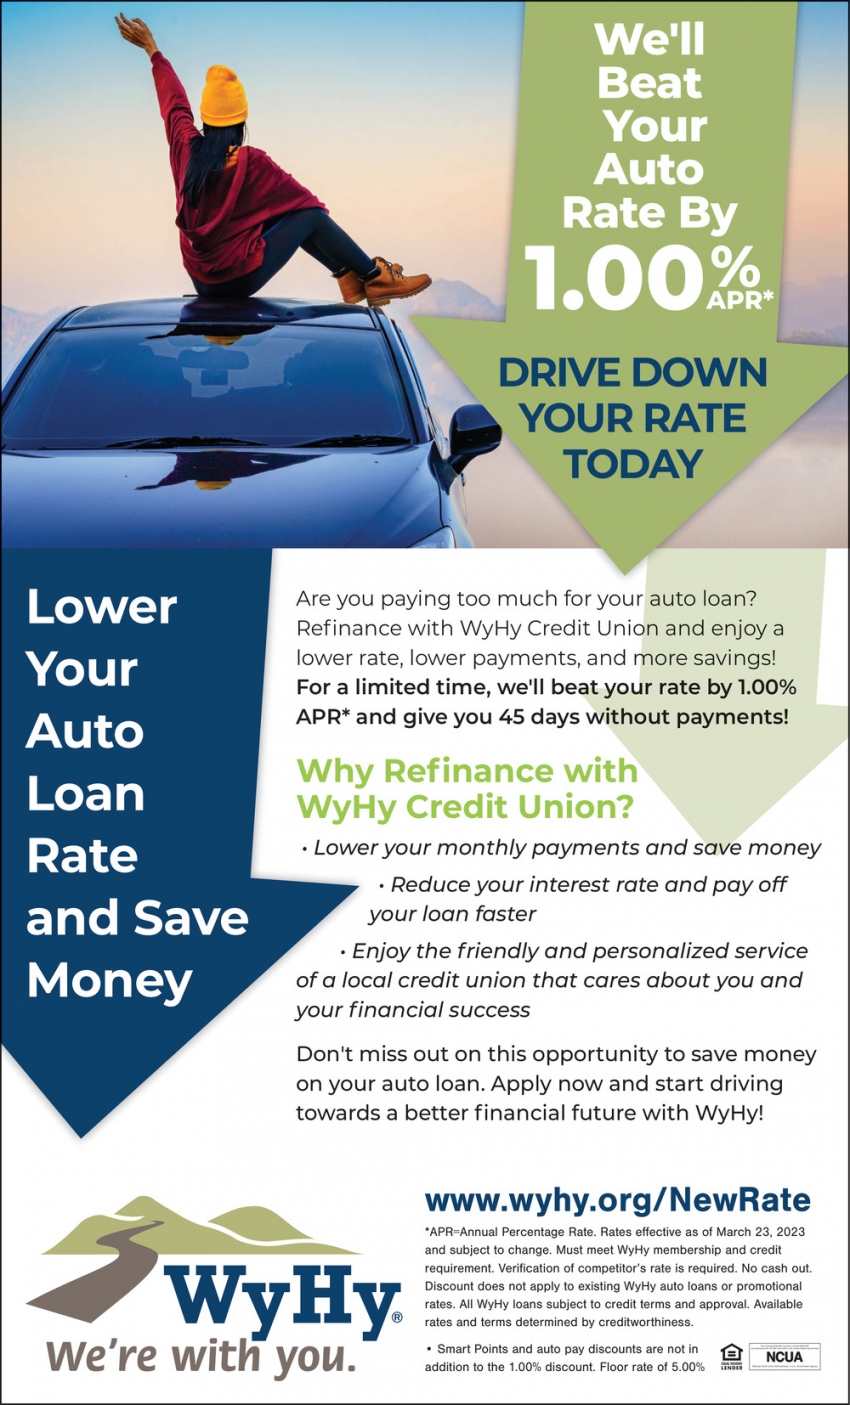 Lower Your Auto Loan Rate and Save Money